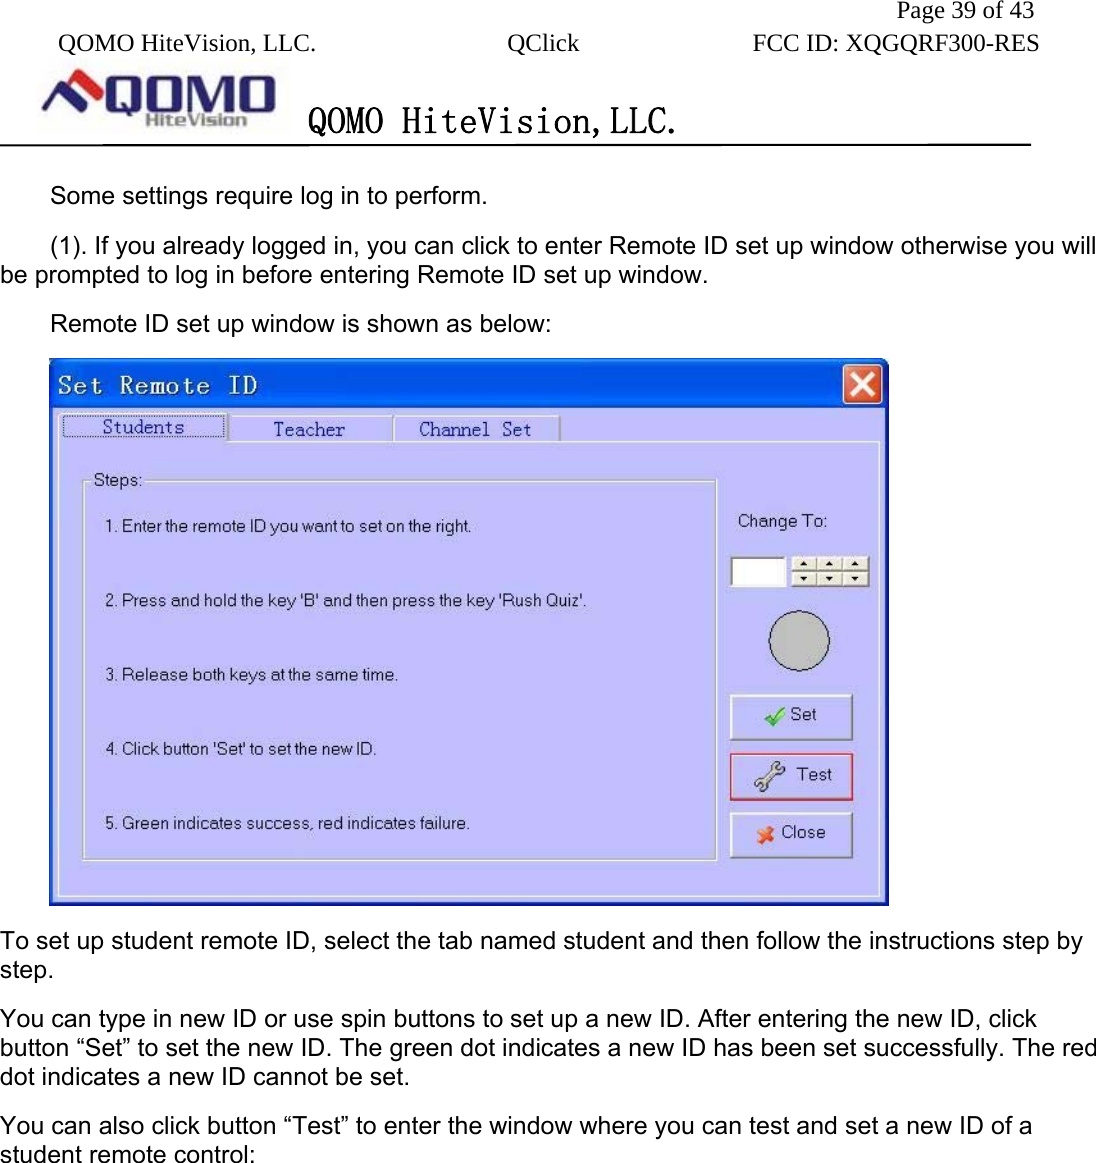               Page 39 of 43  QOMO HiteVision, LLC.  QClick        FCC ID: XQGQRF300-RES      QOMO HiteVision,LLC.   Some settings require log in to perform. (1). If you already logged in, you can click to enter Remote ID set up window otherwise you will be prompted to log in before entering Remote ID set up window. Remote ID set up window is shown as below:    To set up student remote ID, select the tab named student and then follow the instructions step by step.  You can type in new ID or use spin buttons to set up a new ID. After entering the new ID, click button “Set” to set the new ID. The green dot indicates a new ID has been set successfully. The red dot indicates a new ID cannot be set. You can also click button “Test” to enter the window where you can test and set a new ID of a student remote control: 